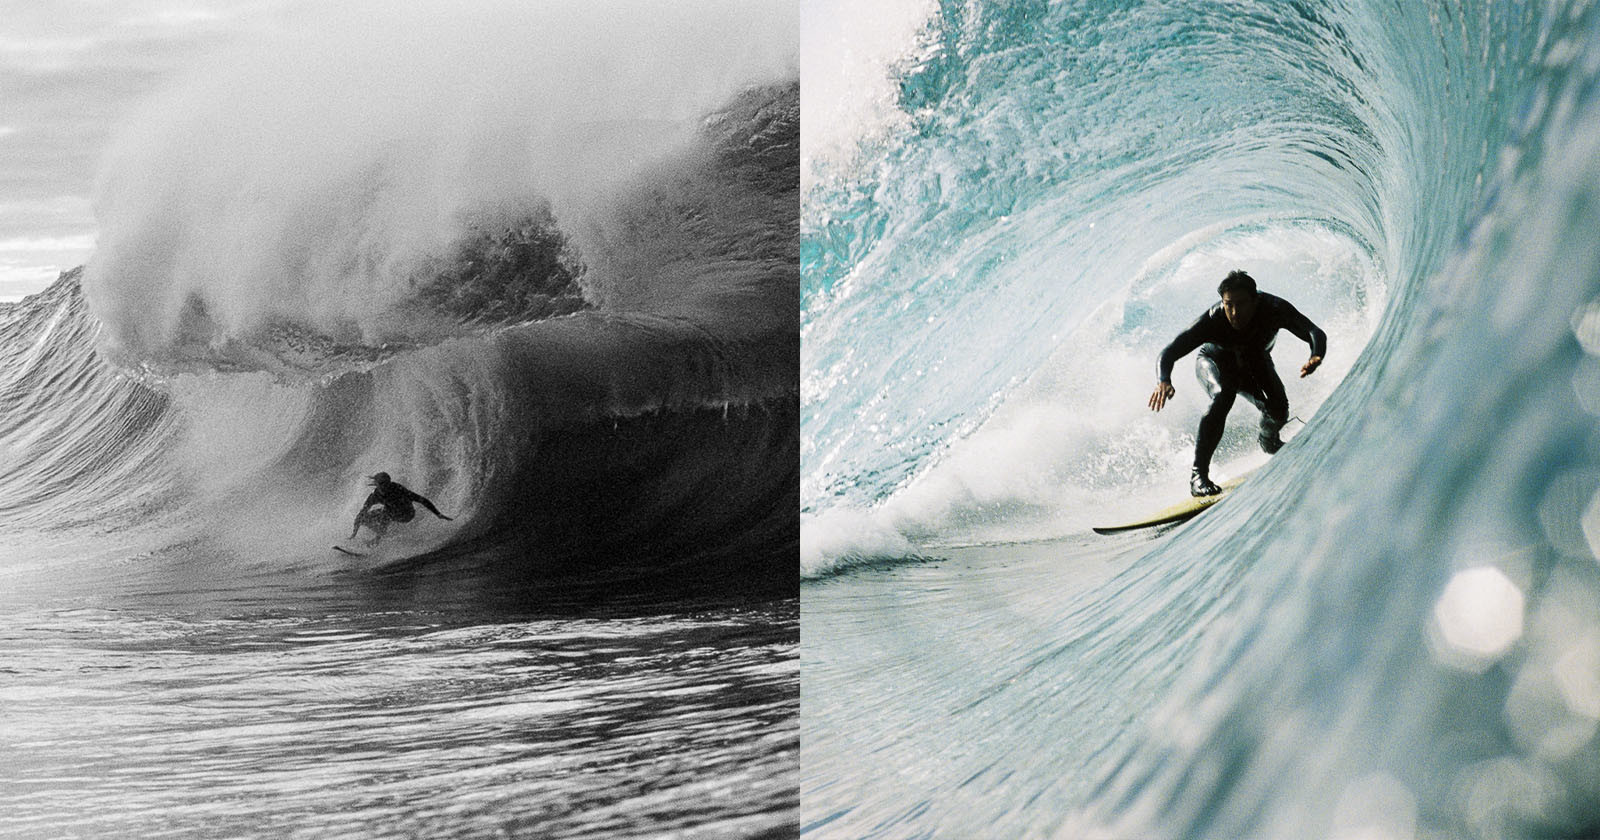 Why This Surf Photographer Ditched Digital and Went Back to Film